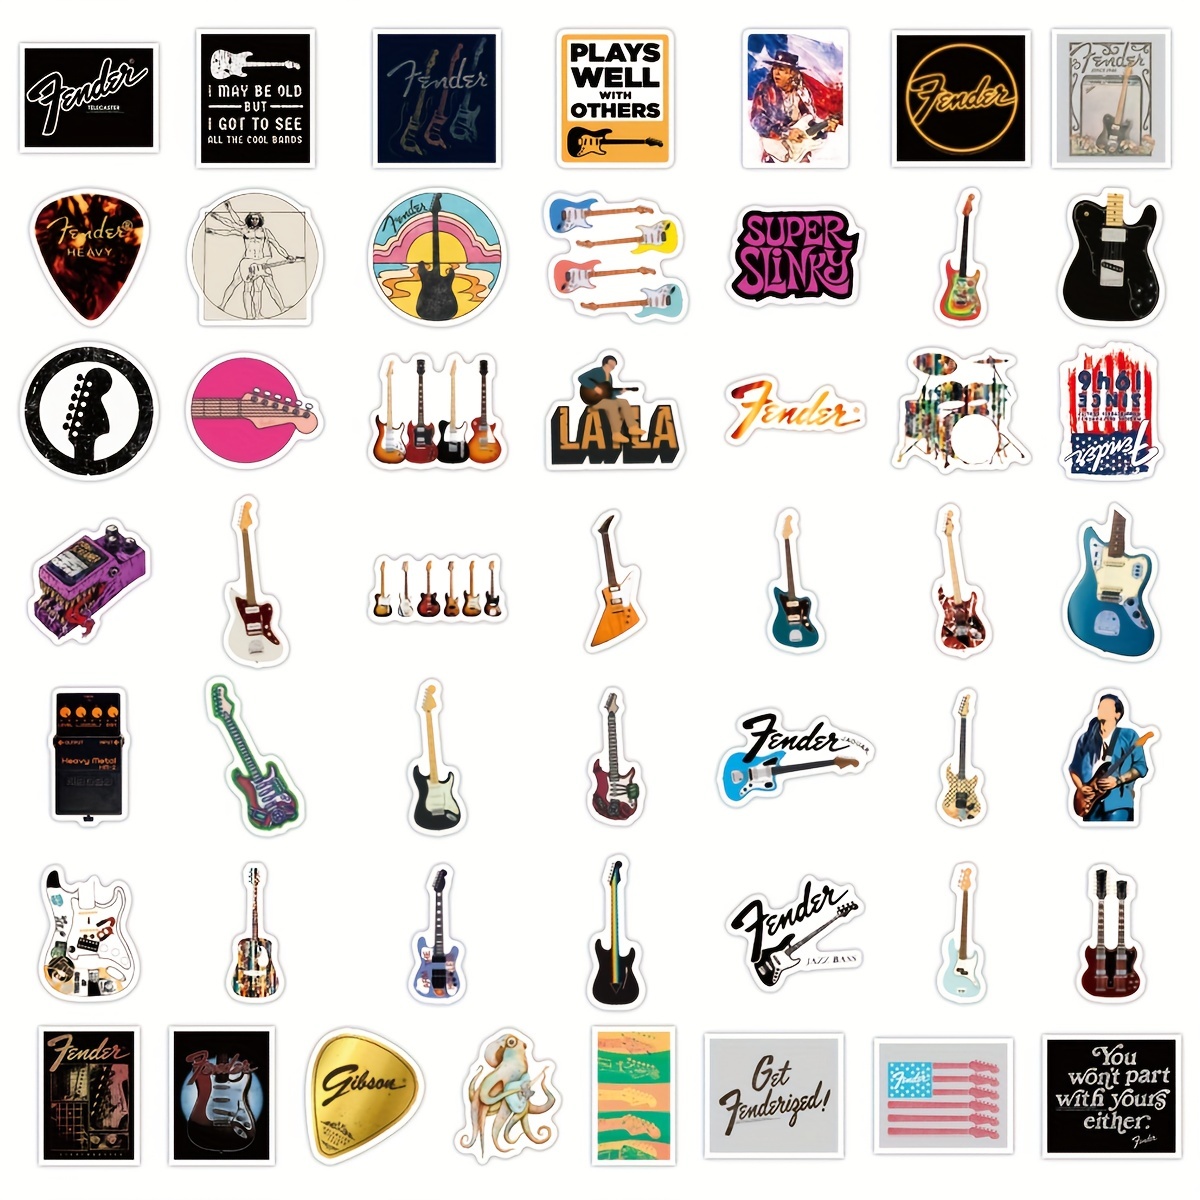 100Pcs Music Decals Stickers for Adults - Laptop Stickers for Water Bottles  Rock Band Stickers Waterproof Vinyl Stickers for Guitar - Skateboard